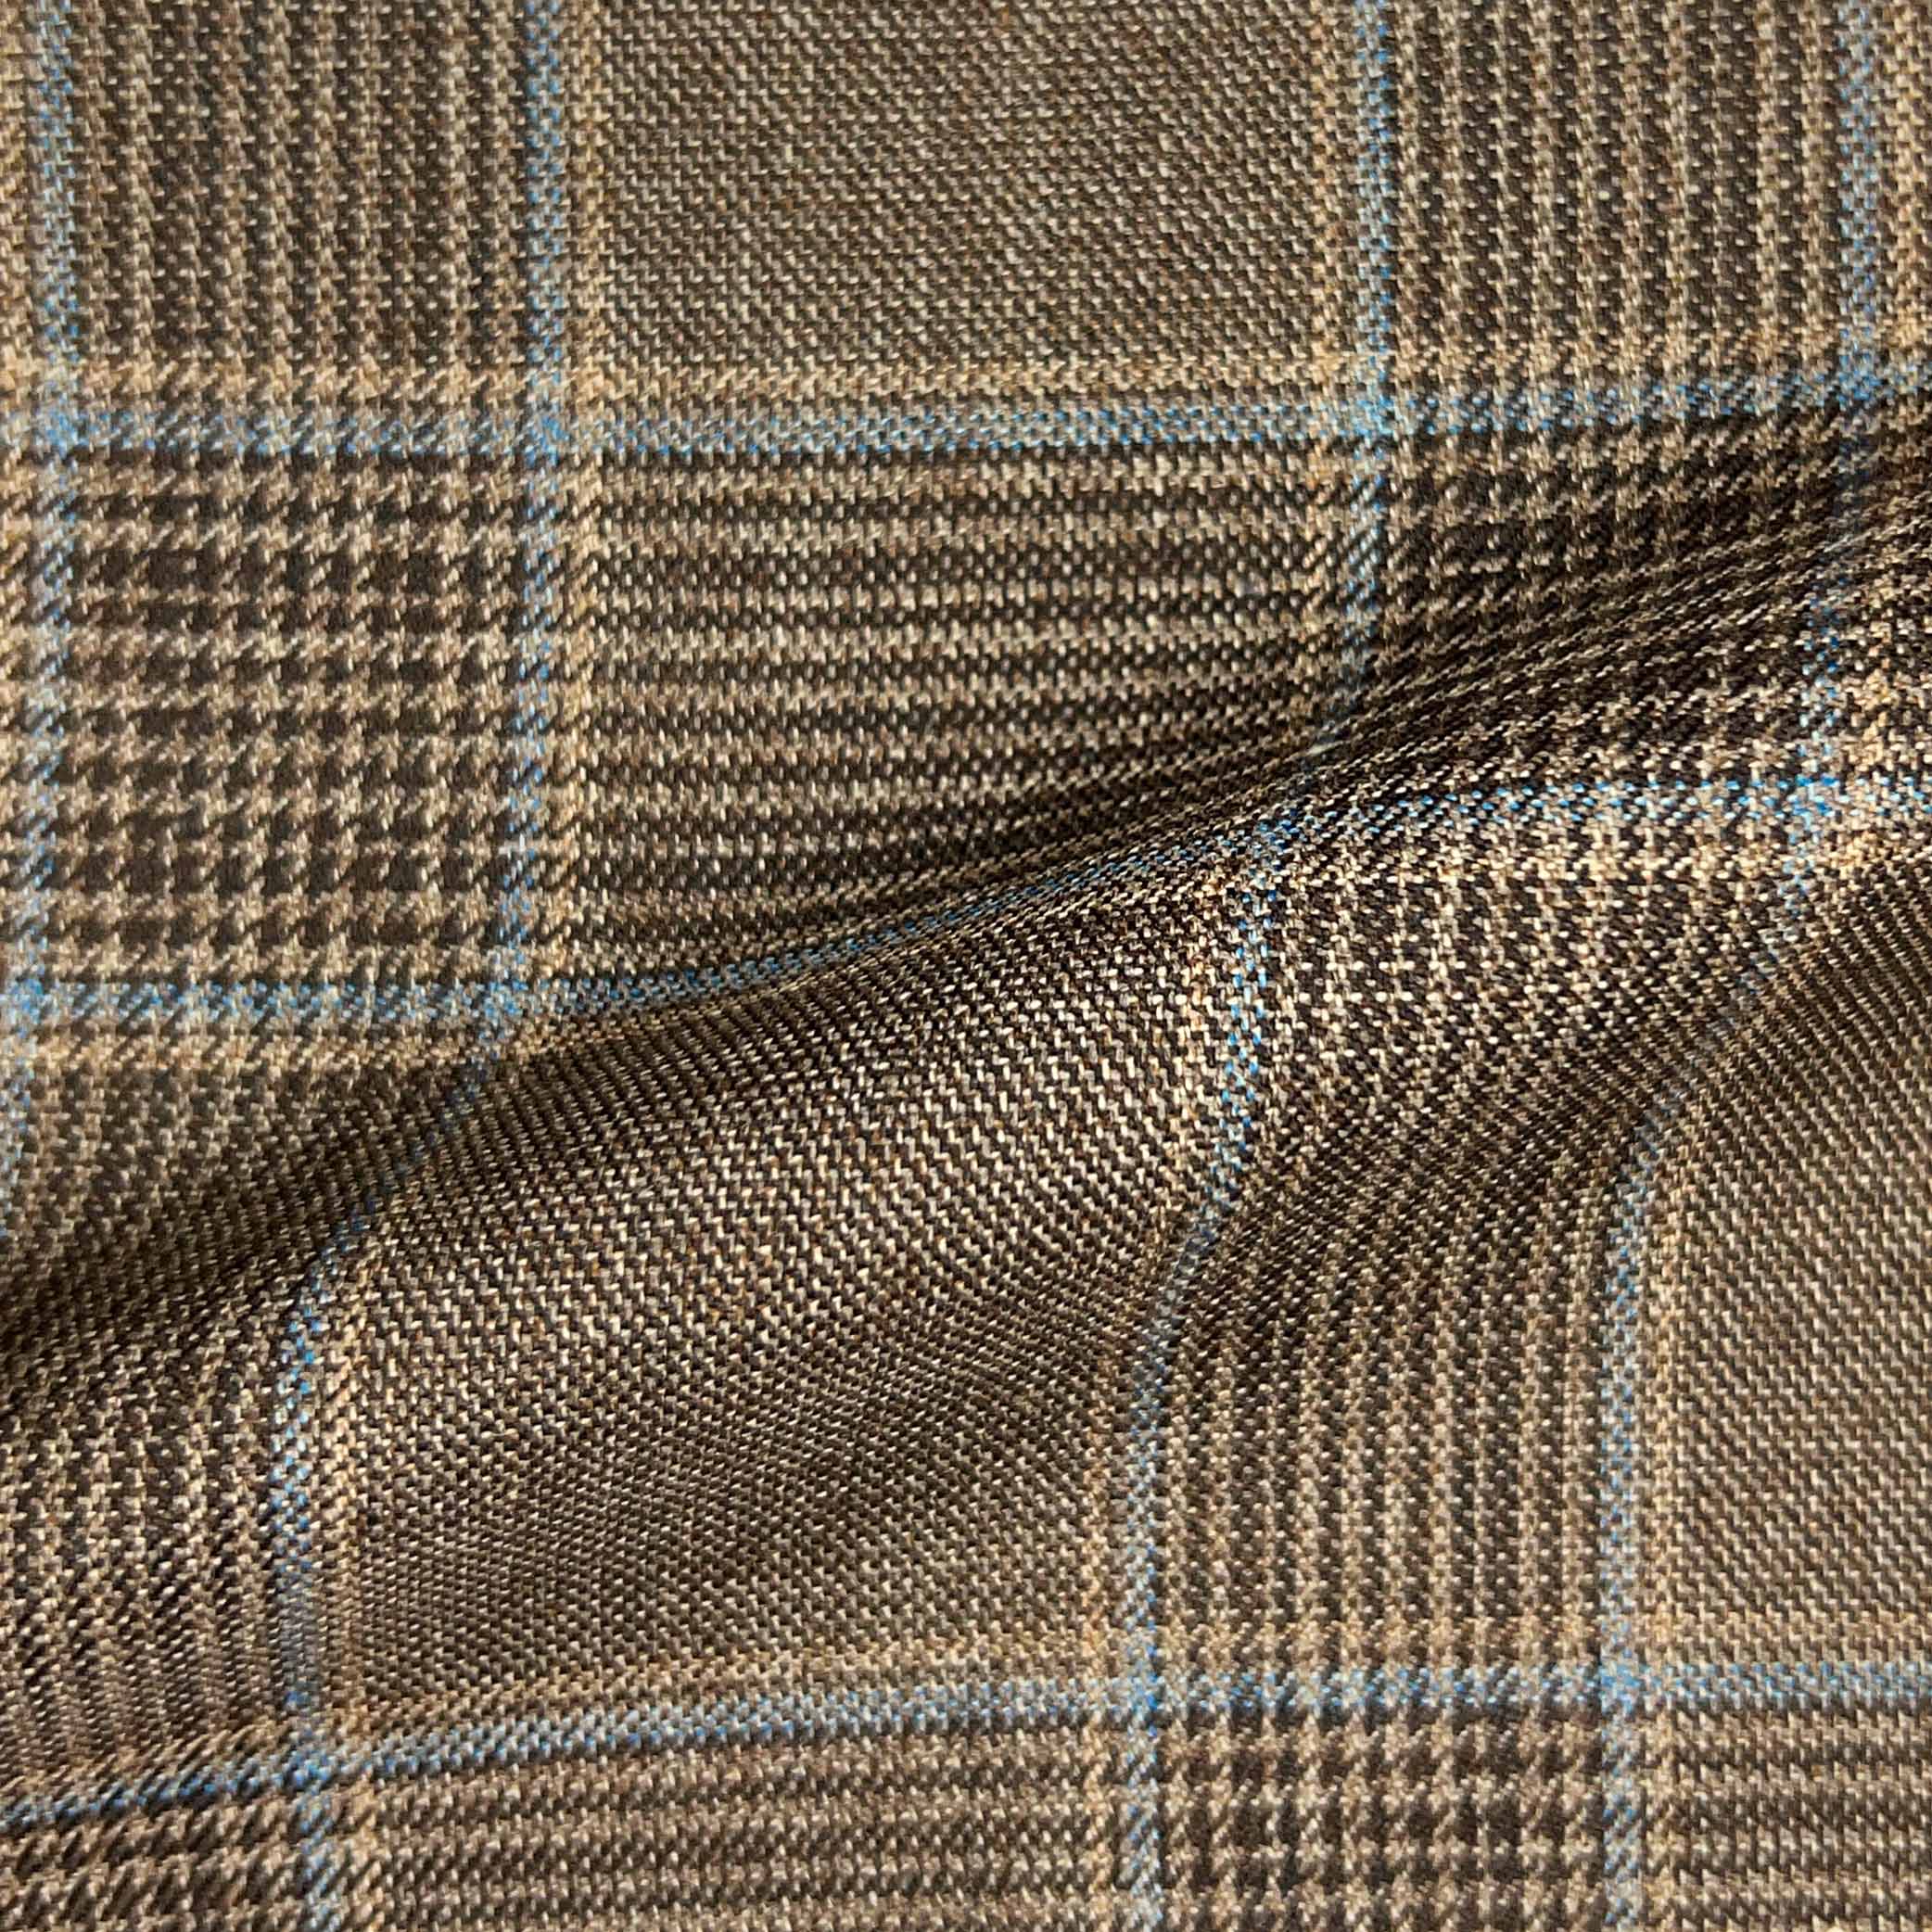 Westwood Hart Online Custom Hand Tailor Suits Sportcoats Trousers Waistcoats Overcoats Mocha Brown Prince Of Wales Glen Plaid With Blue Windowpane